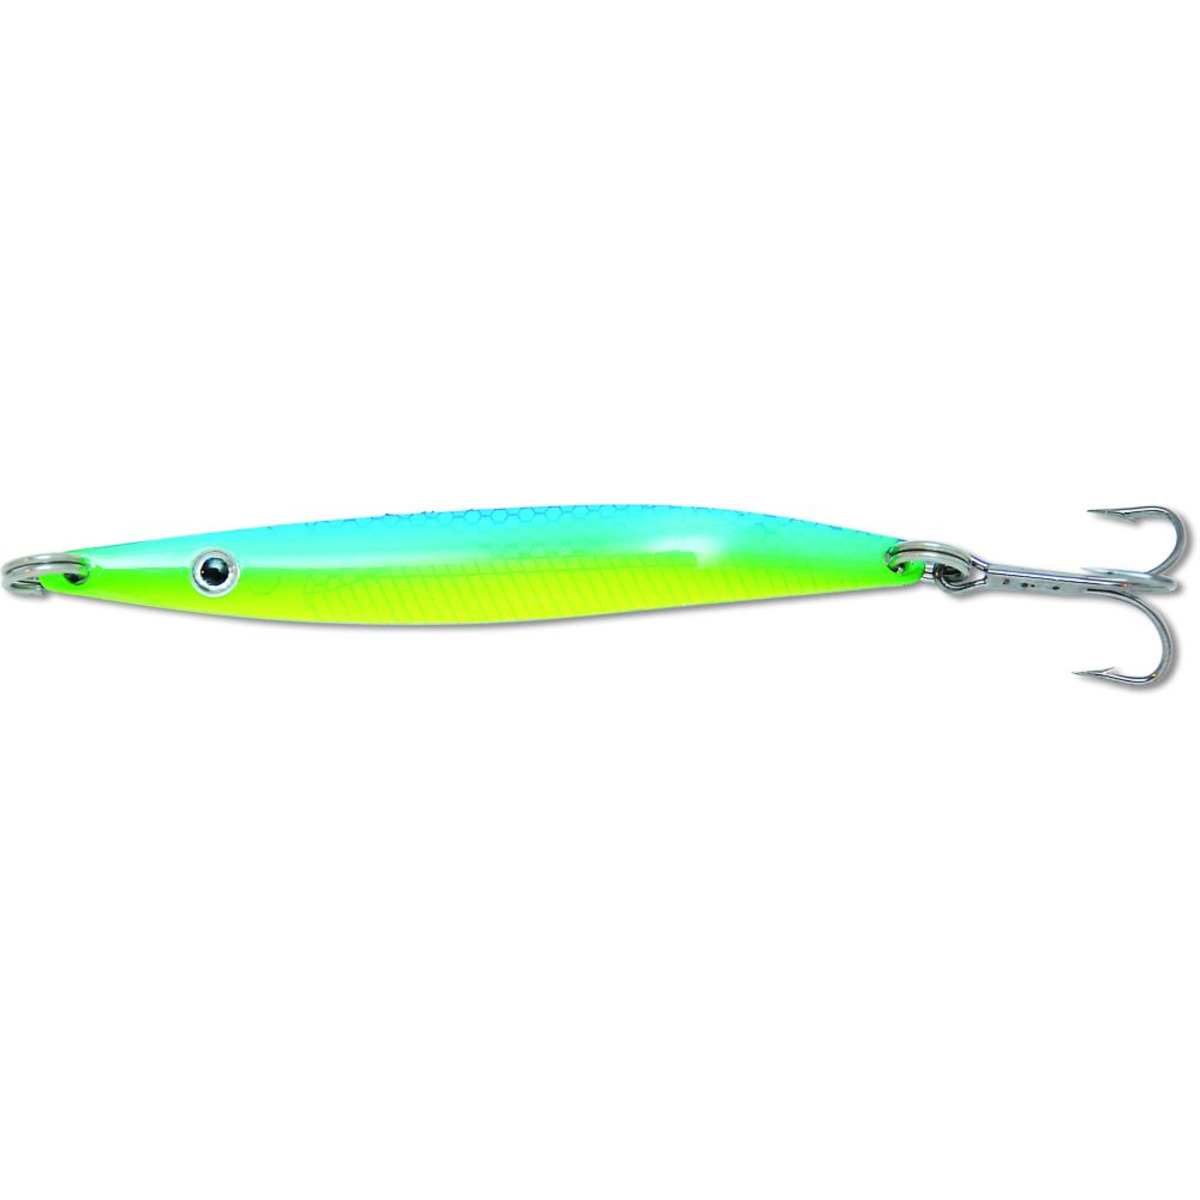 Zebco Impact Spoon - 25 g - blue/chartreuse